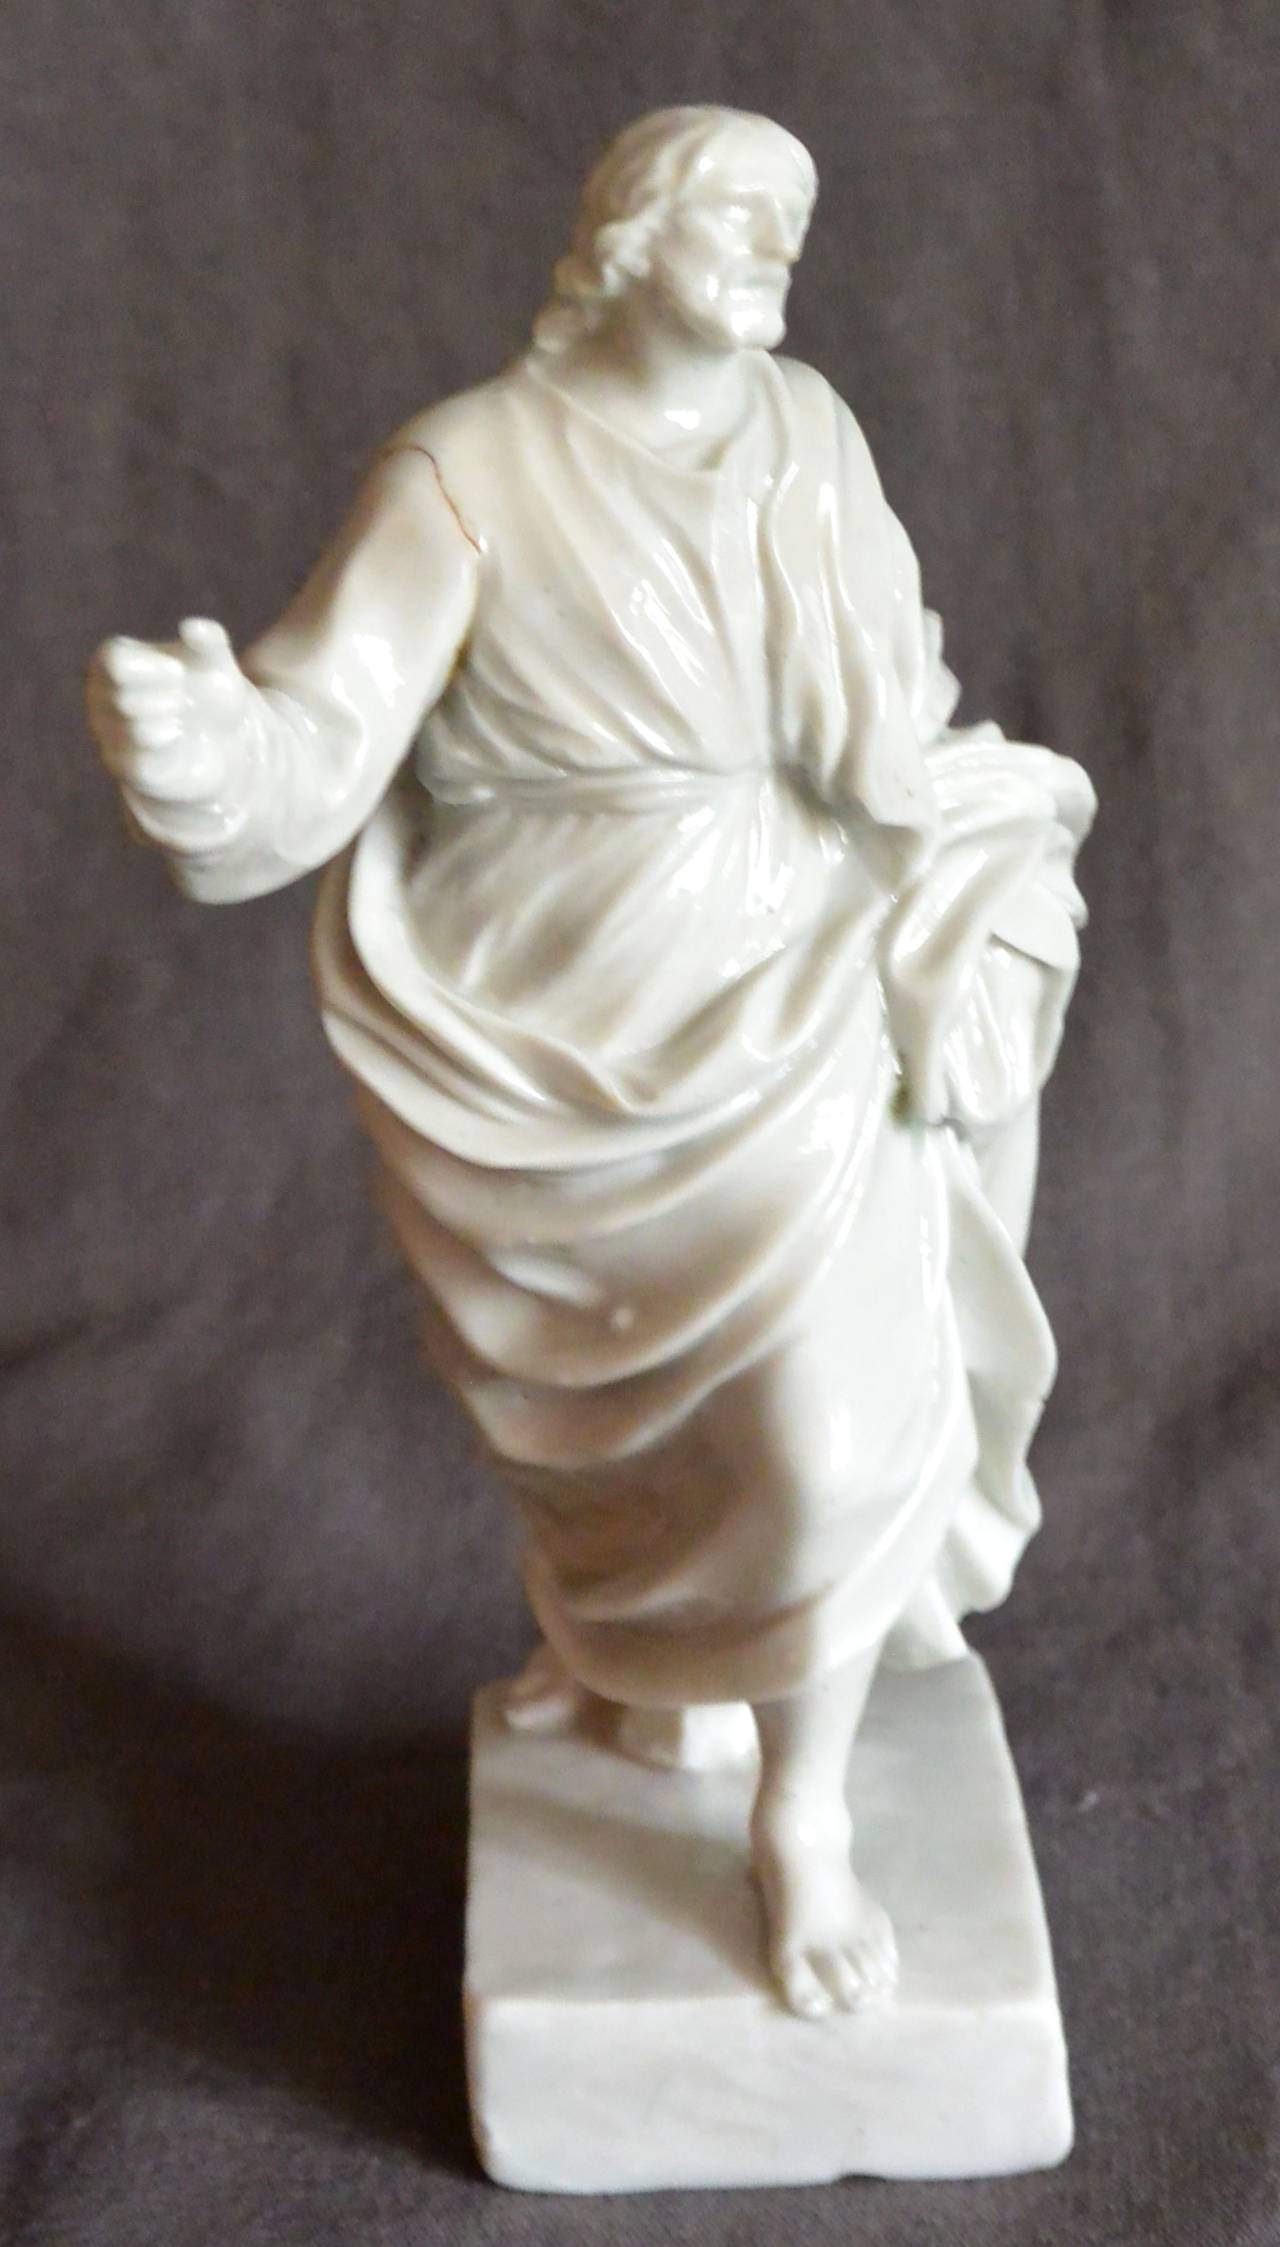 St. John the Revelator white porcelain sculpture. An early white Doccia porcelain figure of St. John the Revelator on the isle of Patmos. “‘And He said unto me, ‘It is done. I am Alpha and Omega, the beginning and the end. I will give unto him that